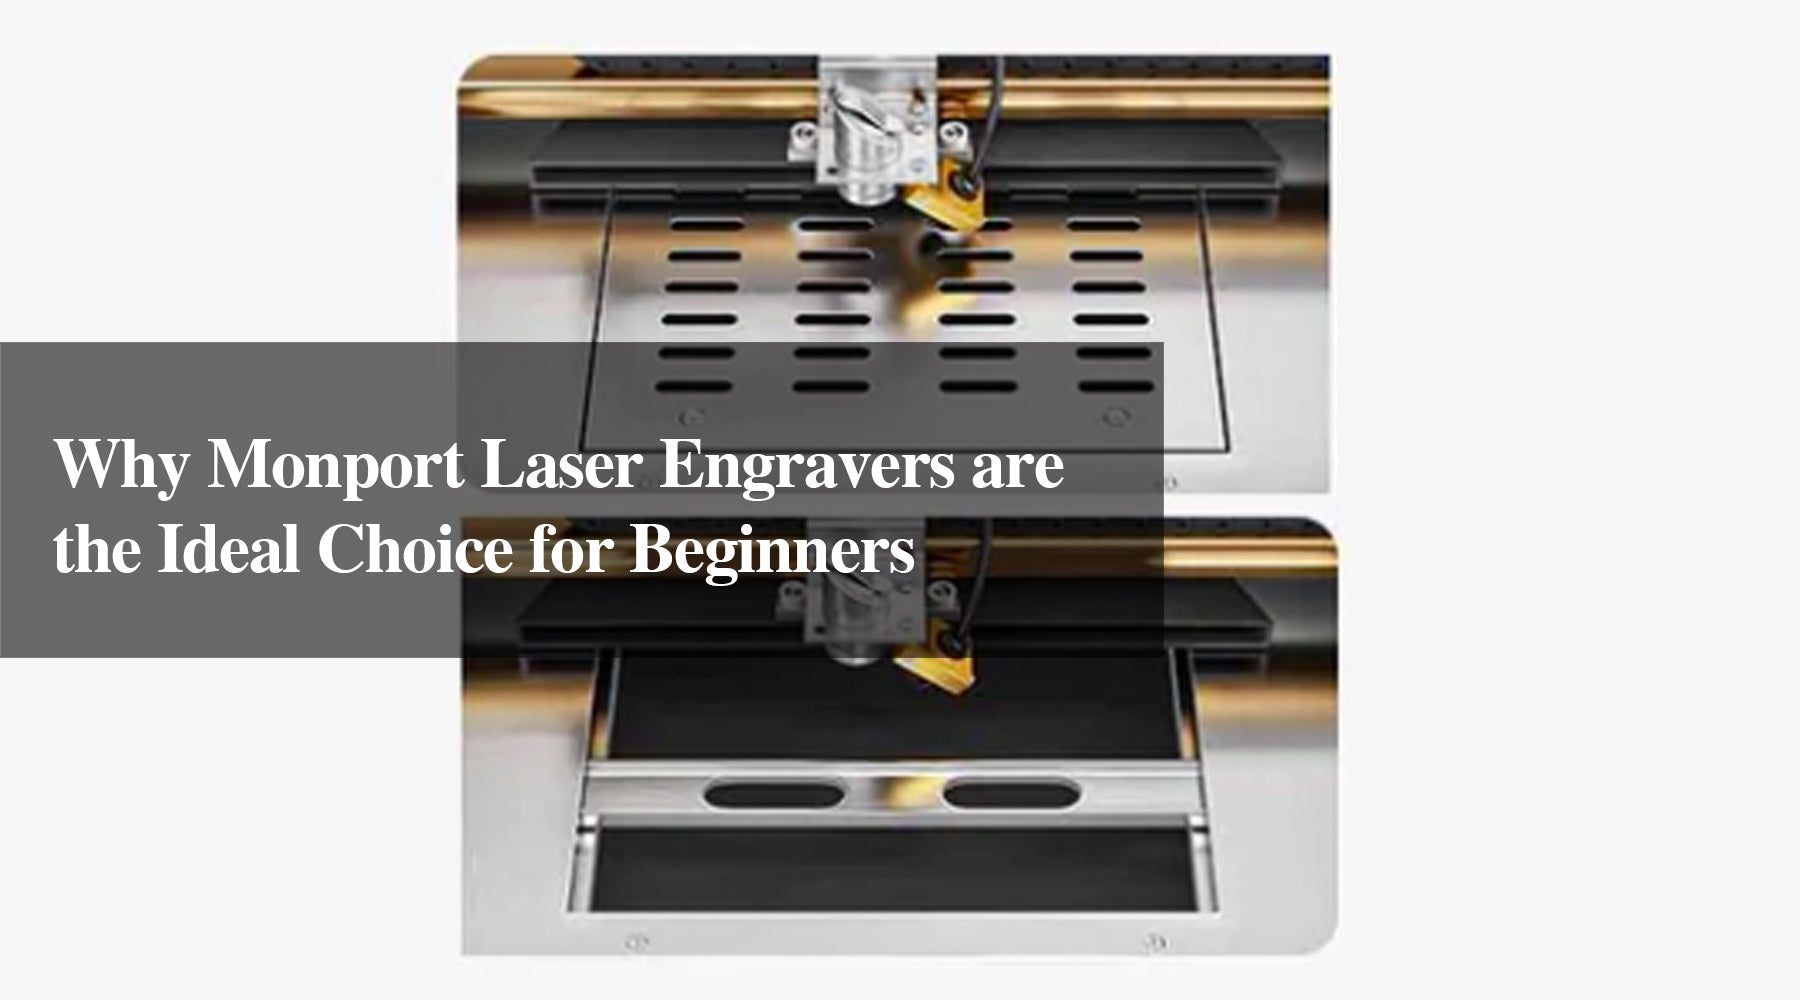 Why Monport Laser Engravers are the Ideal Choice for Beginners